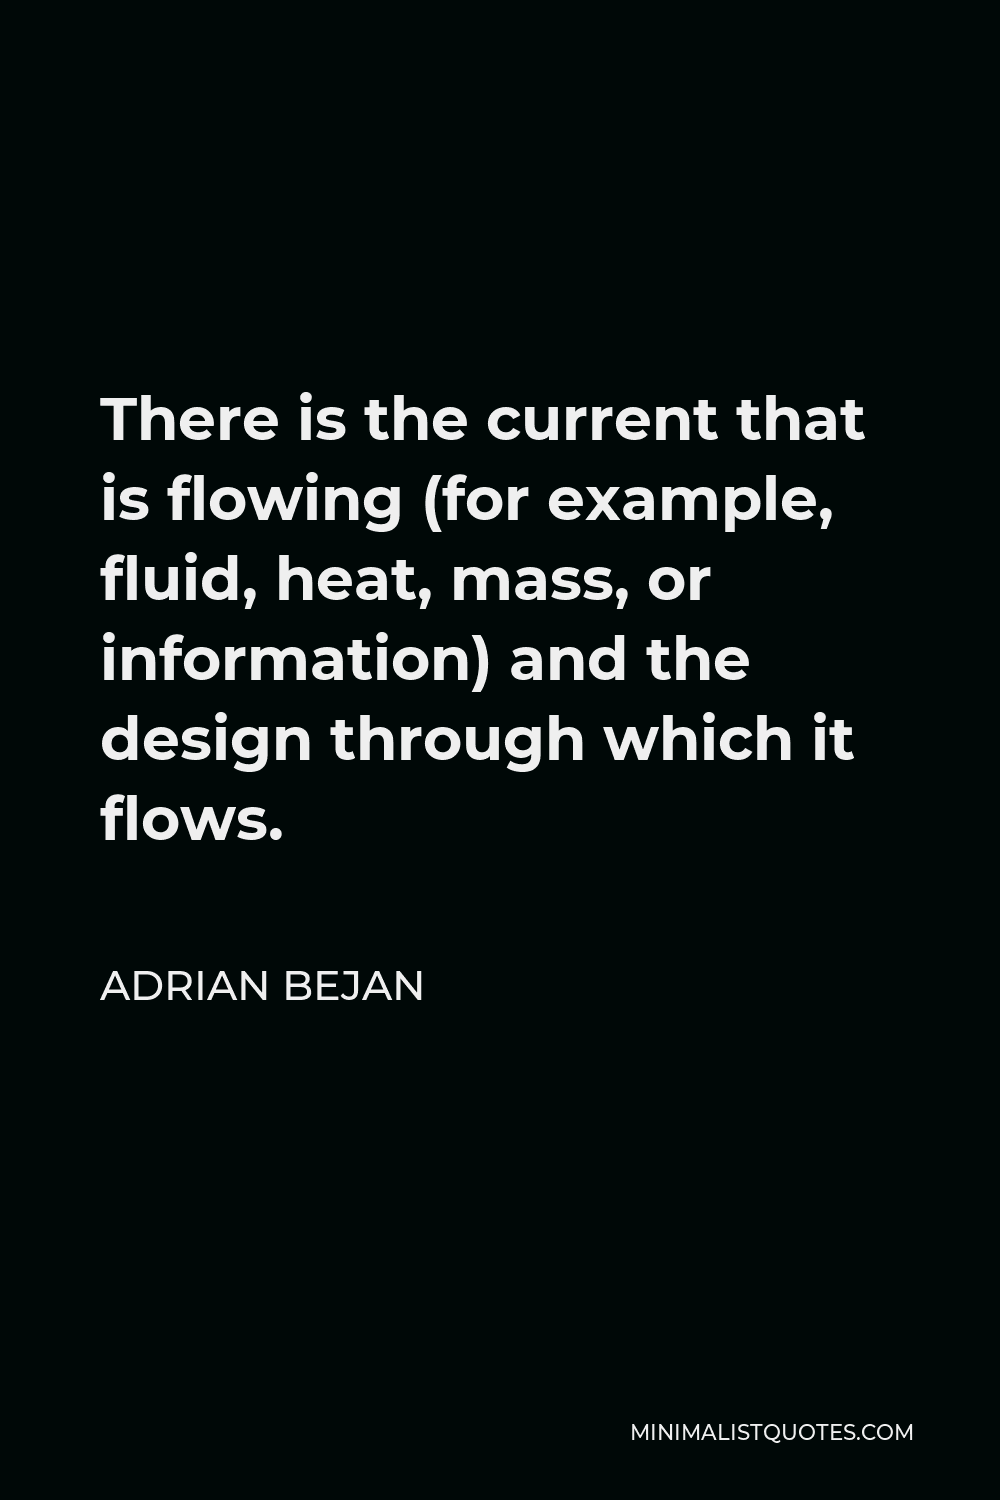 Adrian Bejan Quote - There is the current that is flowing (for example, fluid, heat, mass, or information) and the design through which it flows.